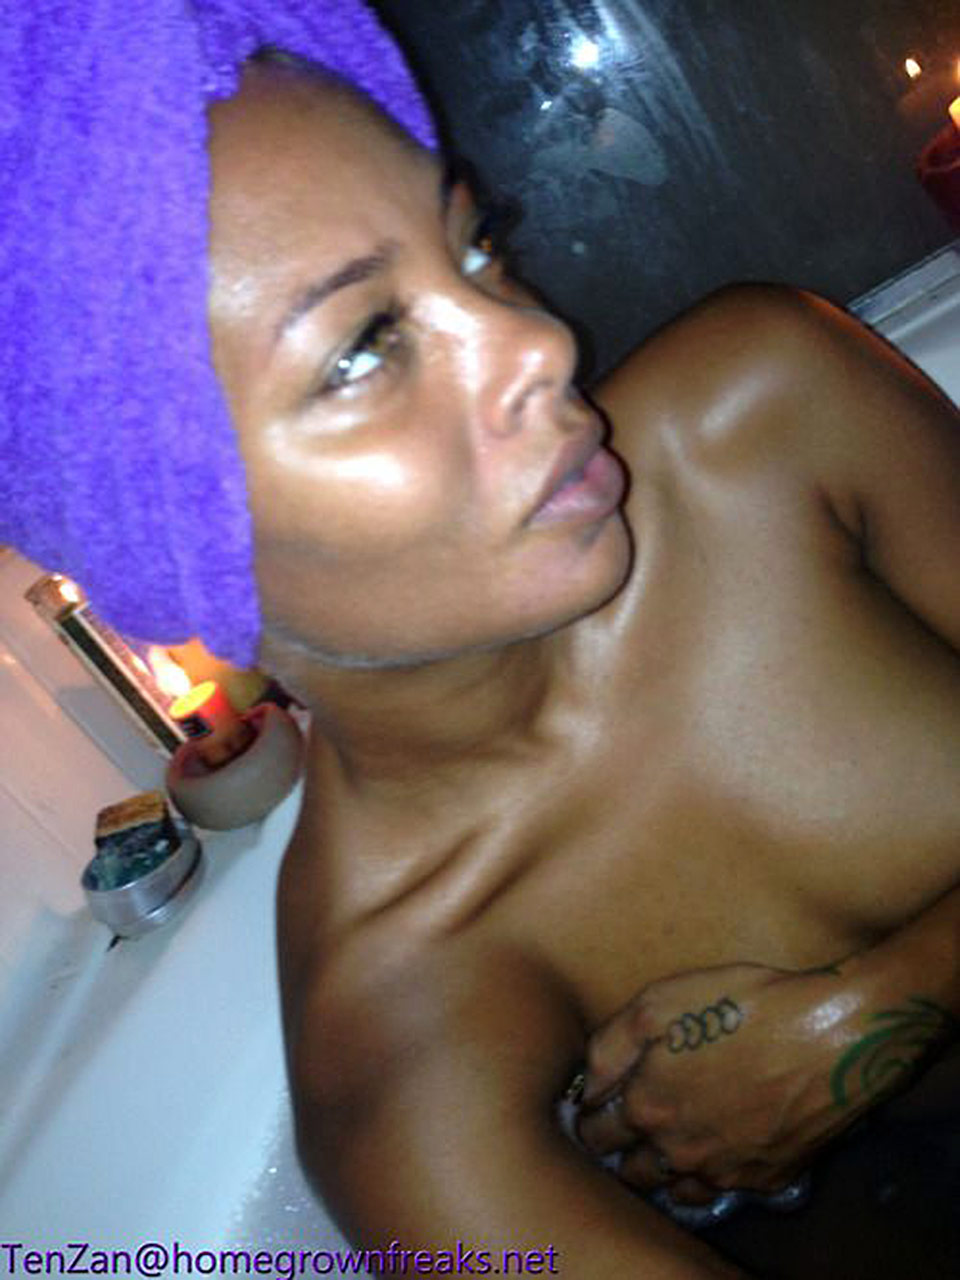 Eva Marcille Nude Private Pics — Ebony Queen Is Bathing And Posing With Nipples Out Of Towel